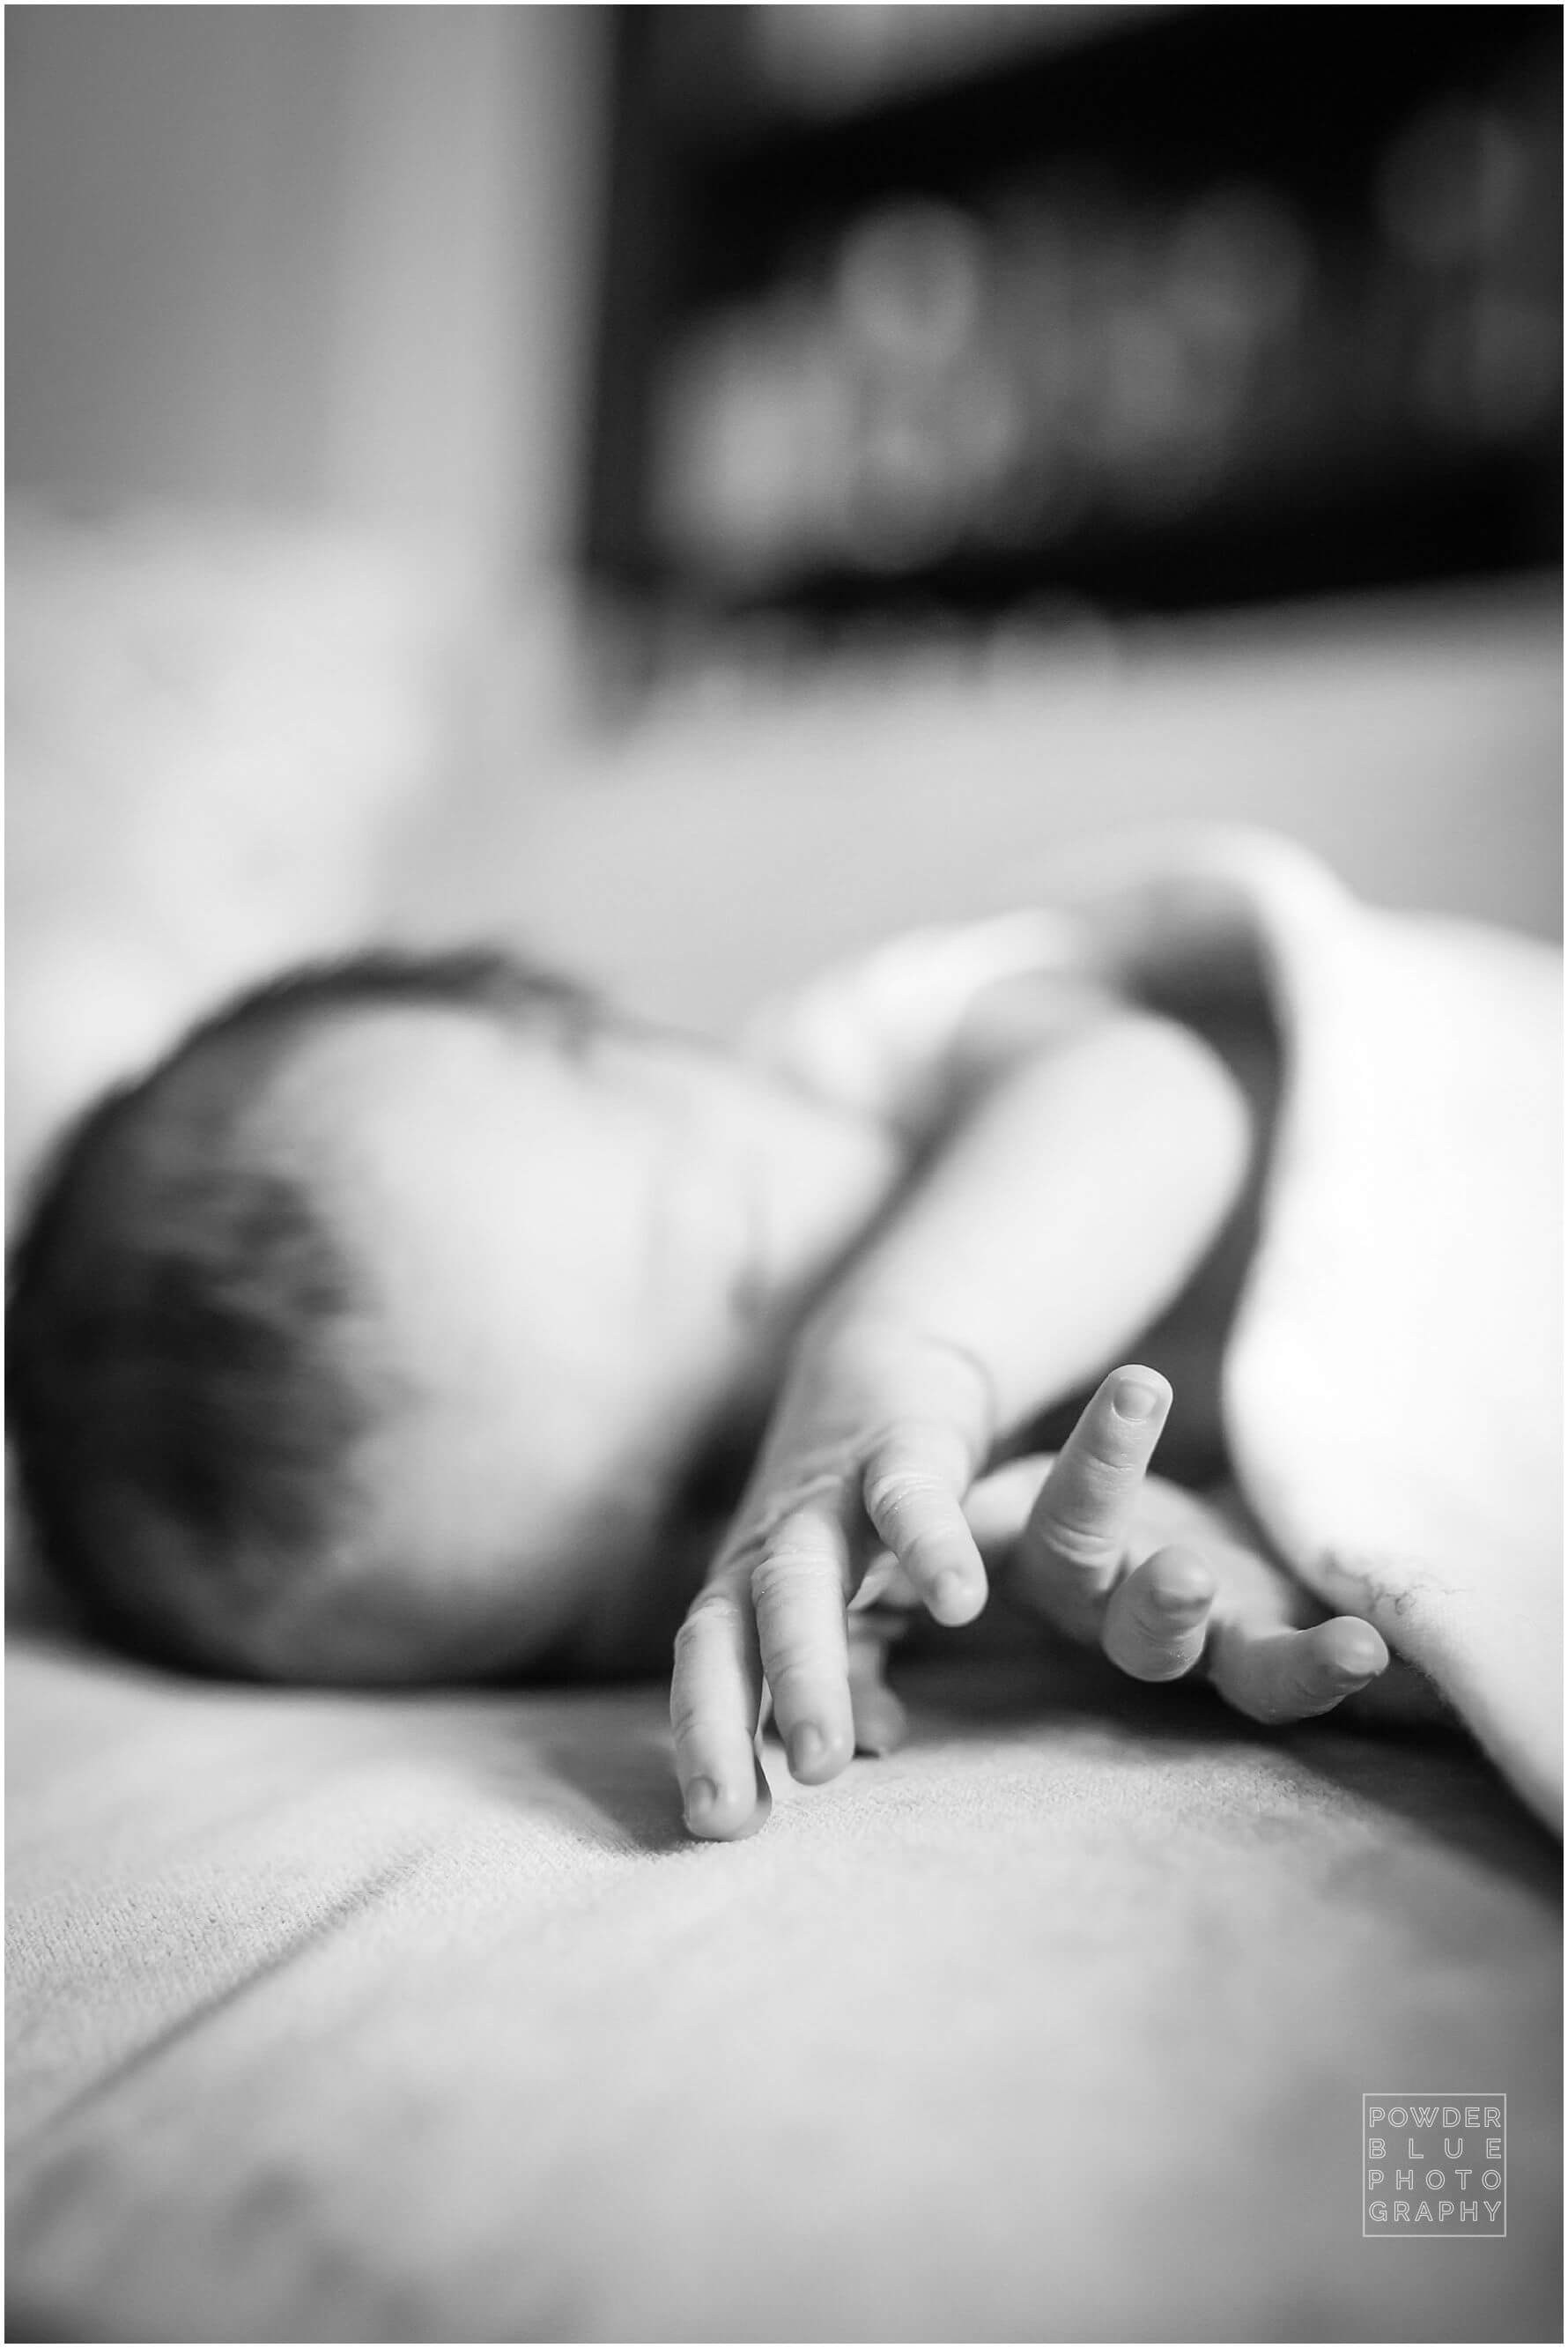 black and white image of pittsburgh newborn baby, photographed by Missy Timko.